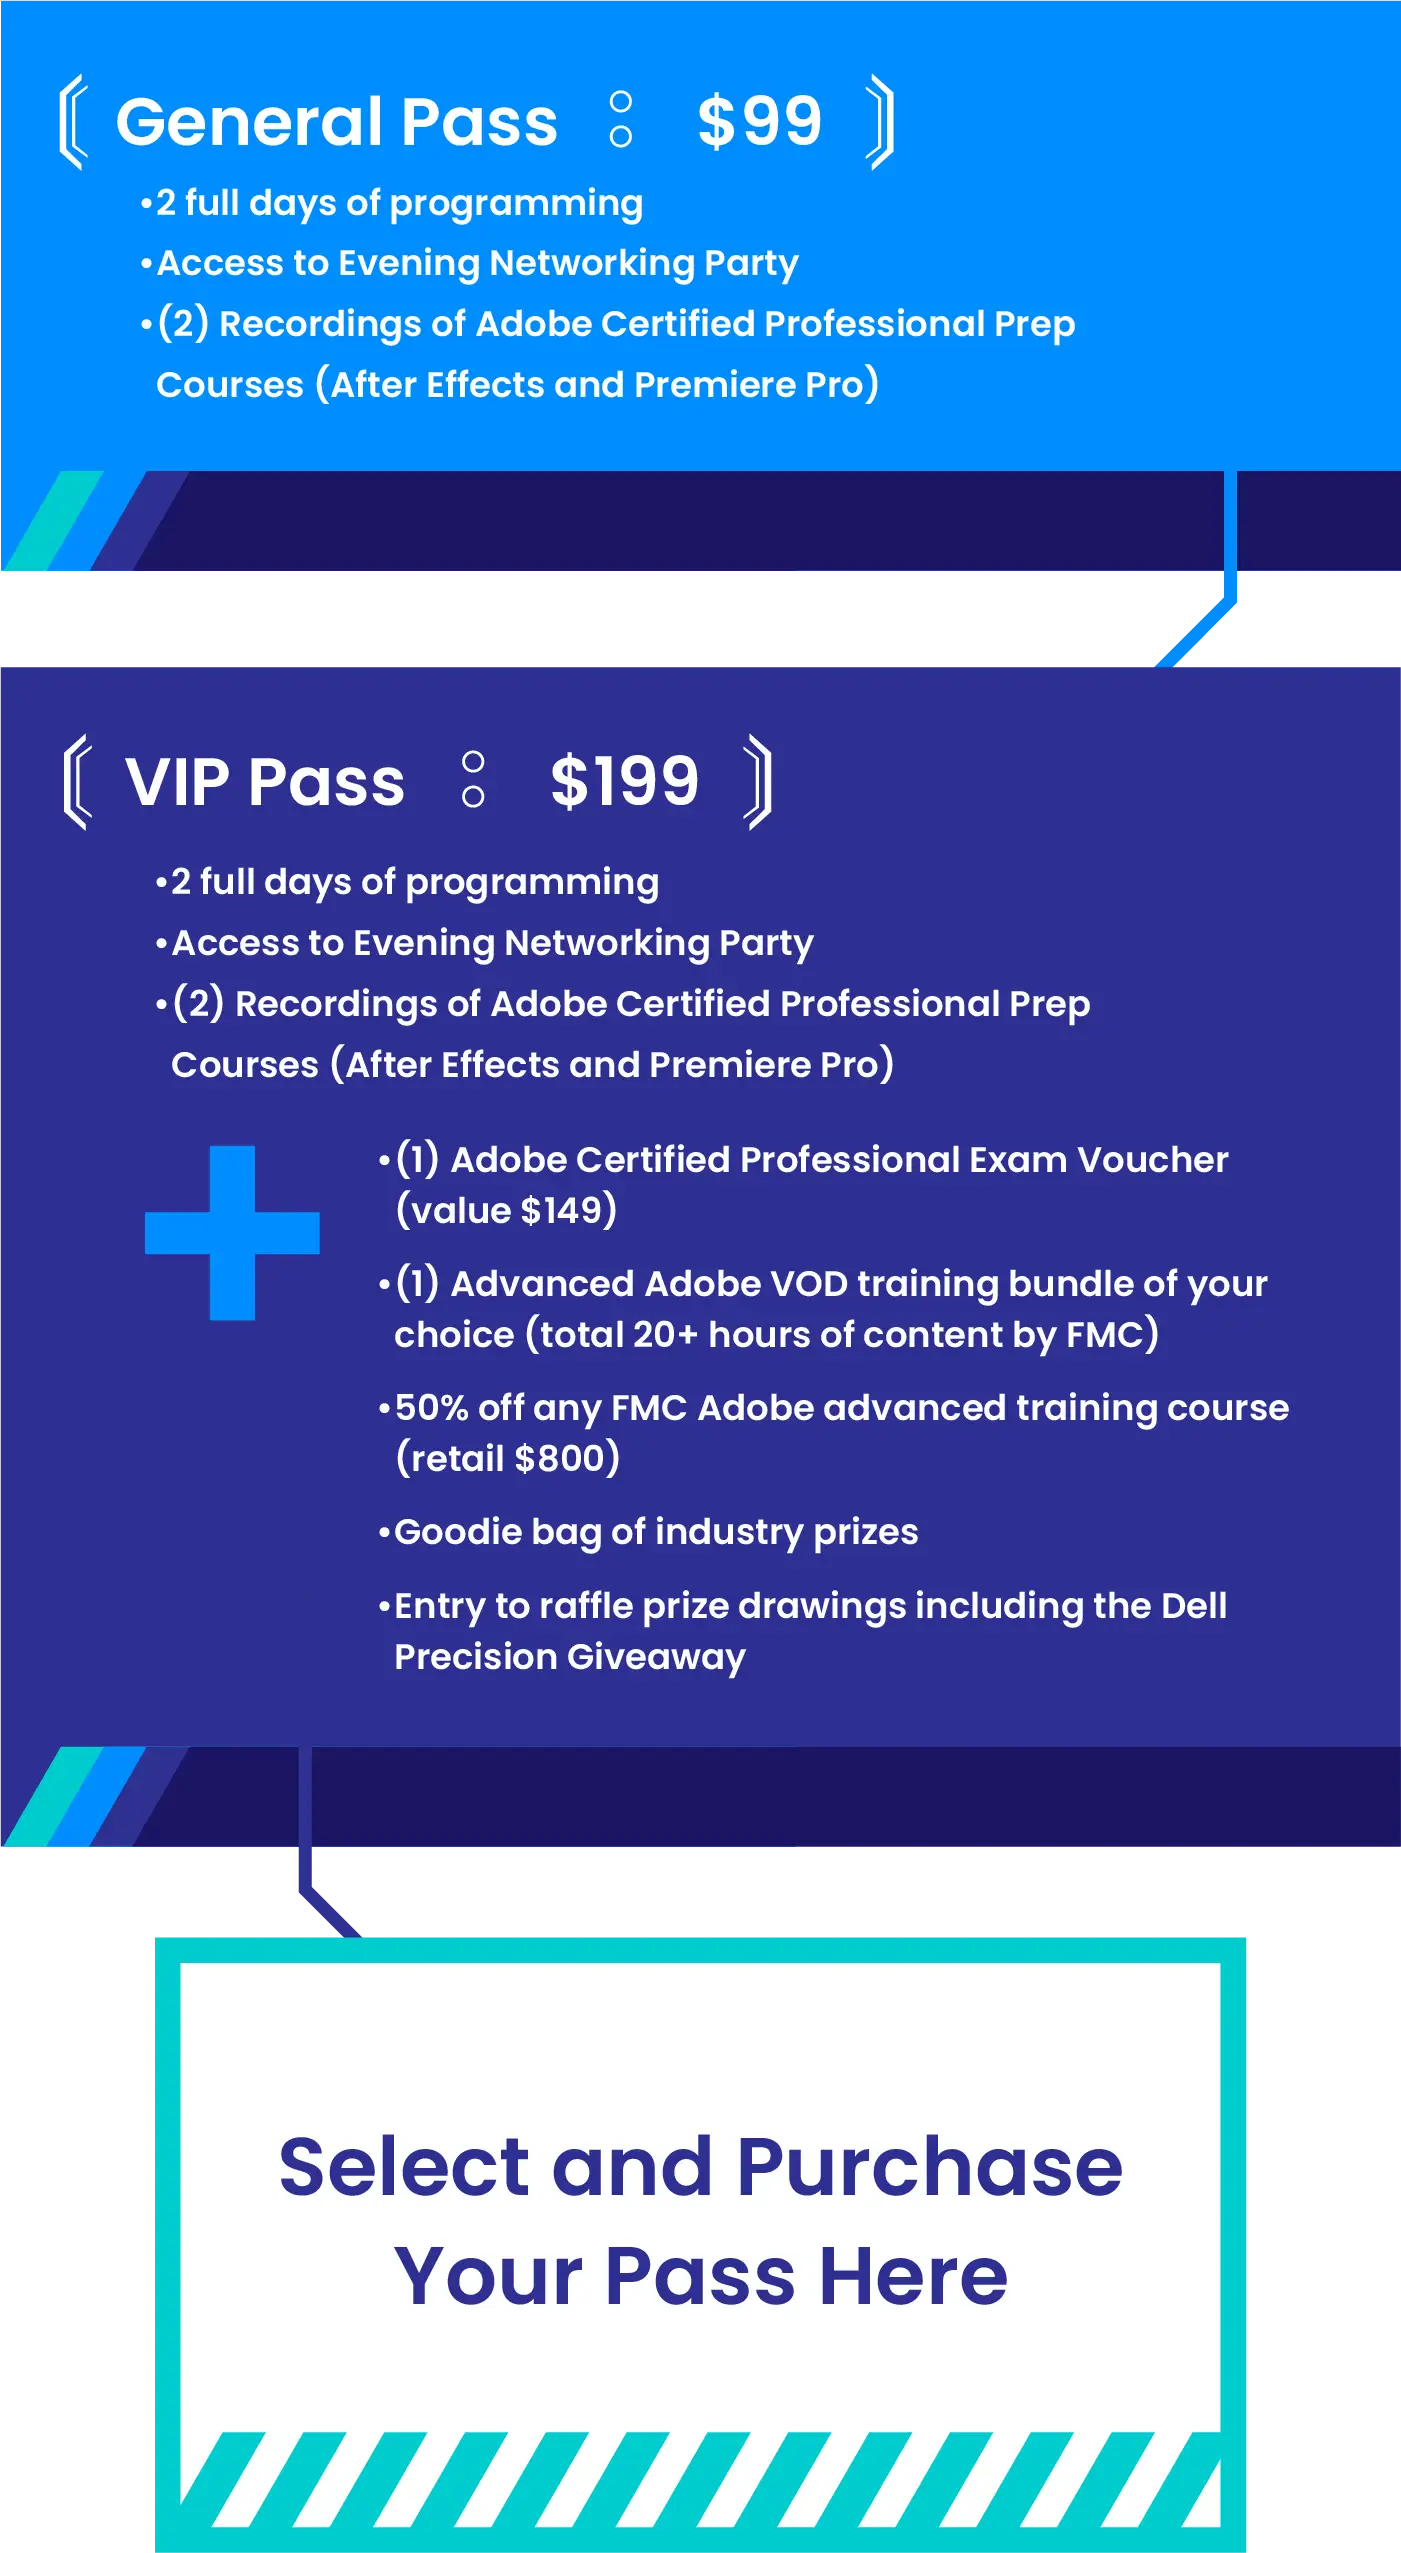 Adobe Video World Registration options - Click here to select and purchase a pass